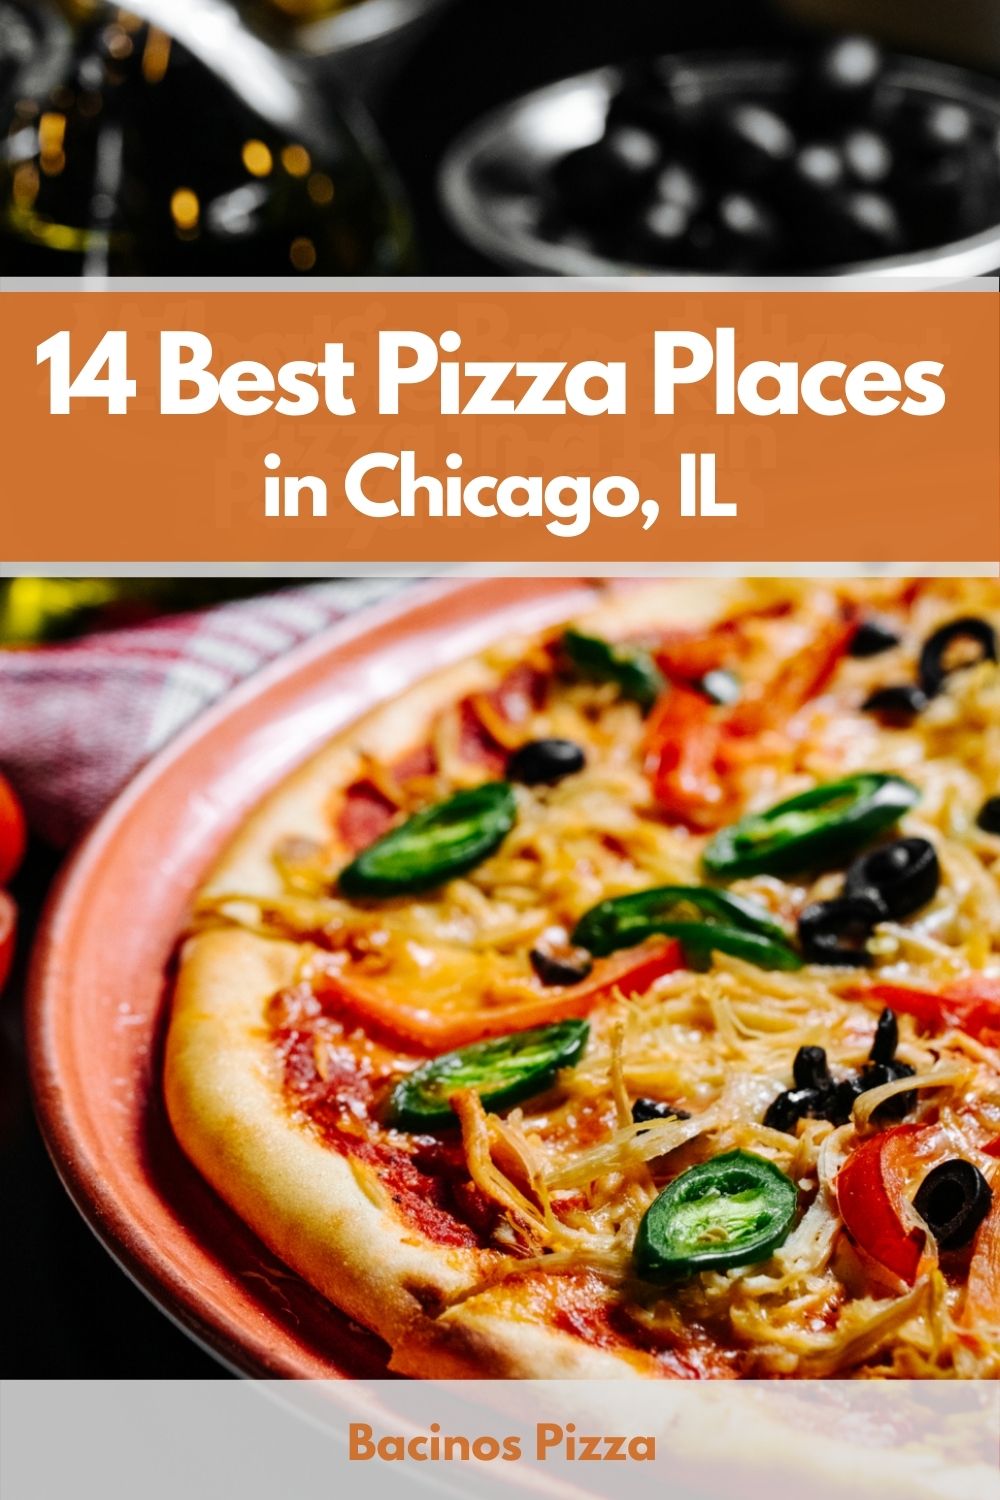 14 Best Pizza Places in Chicago, IL pin